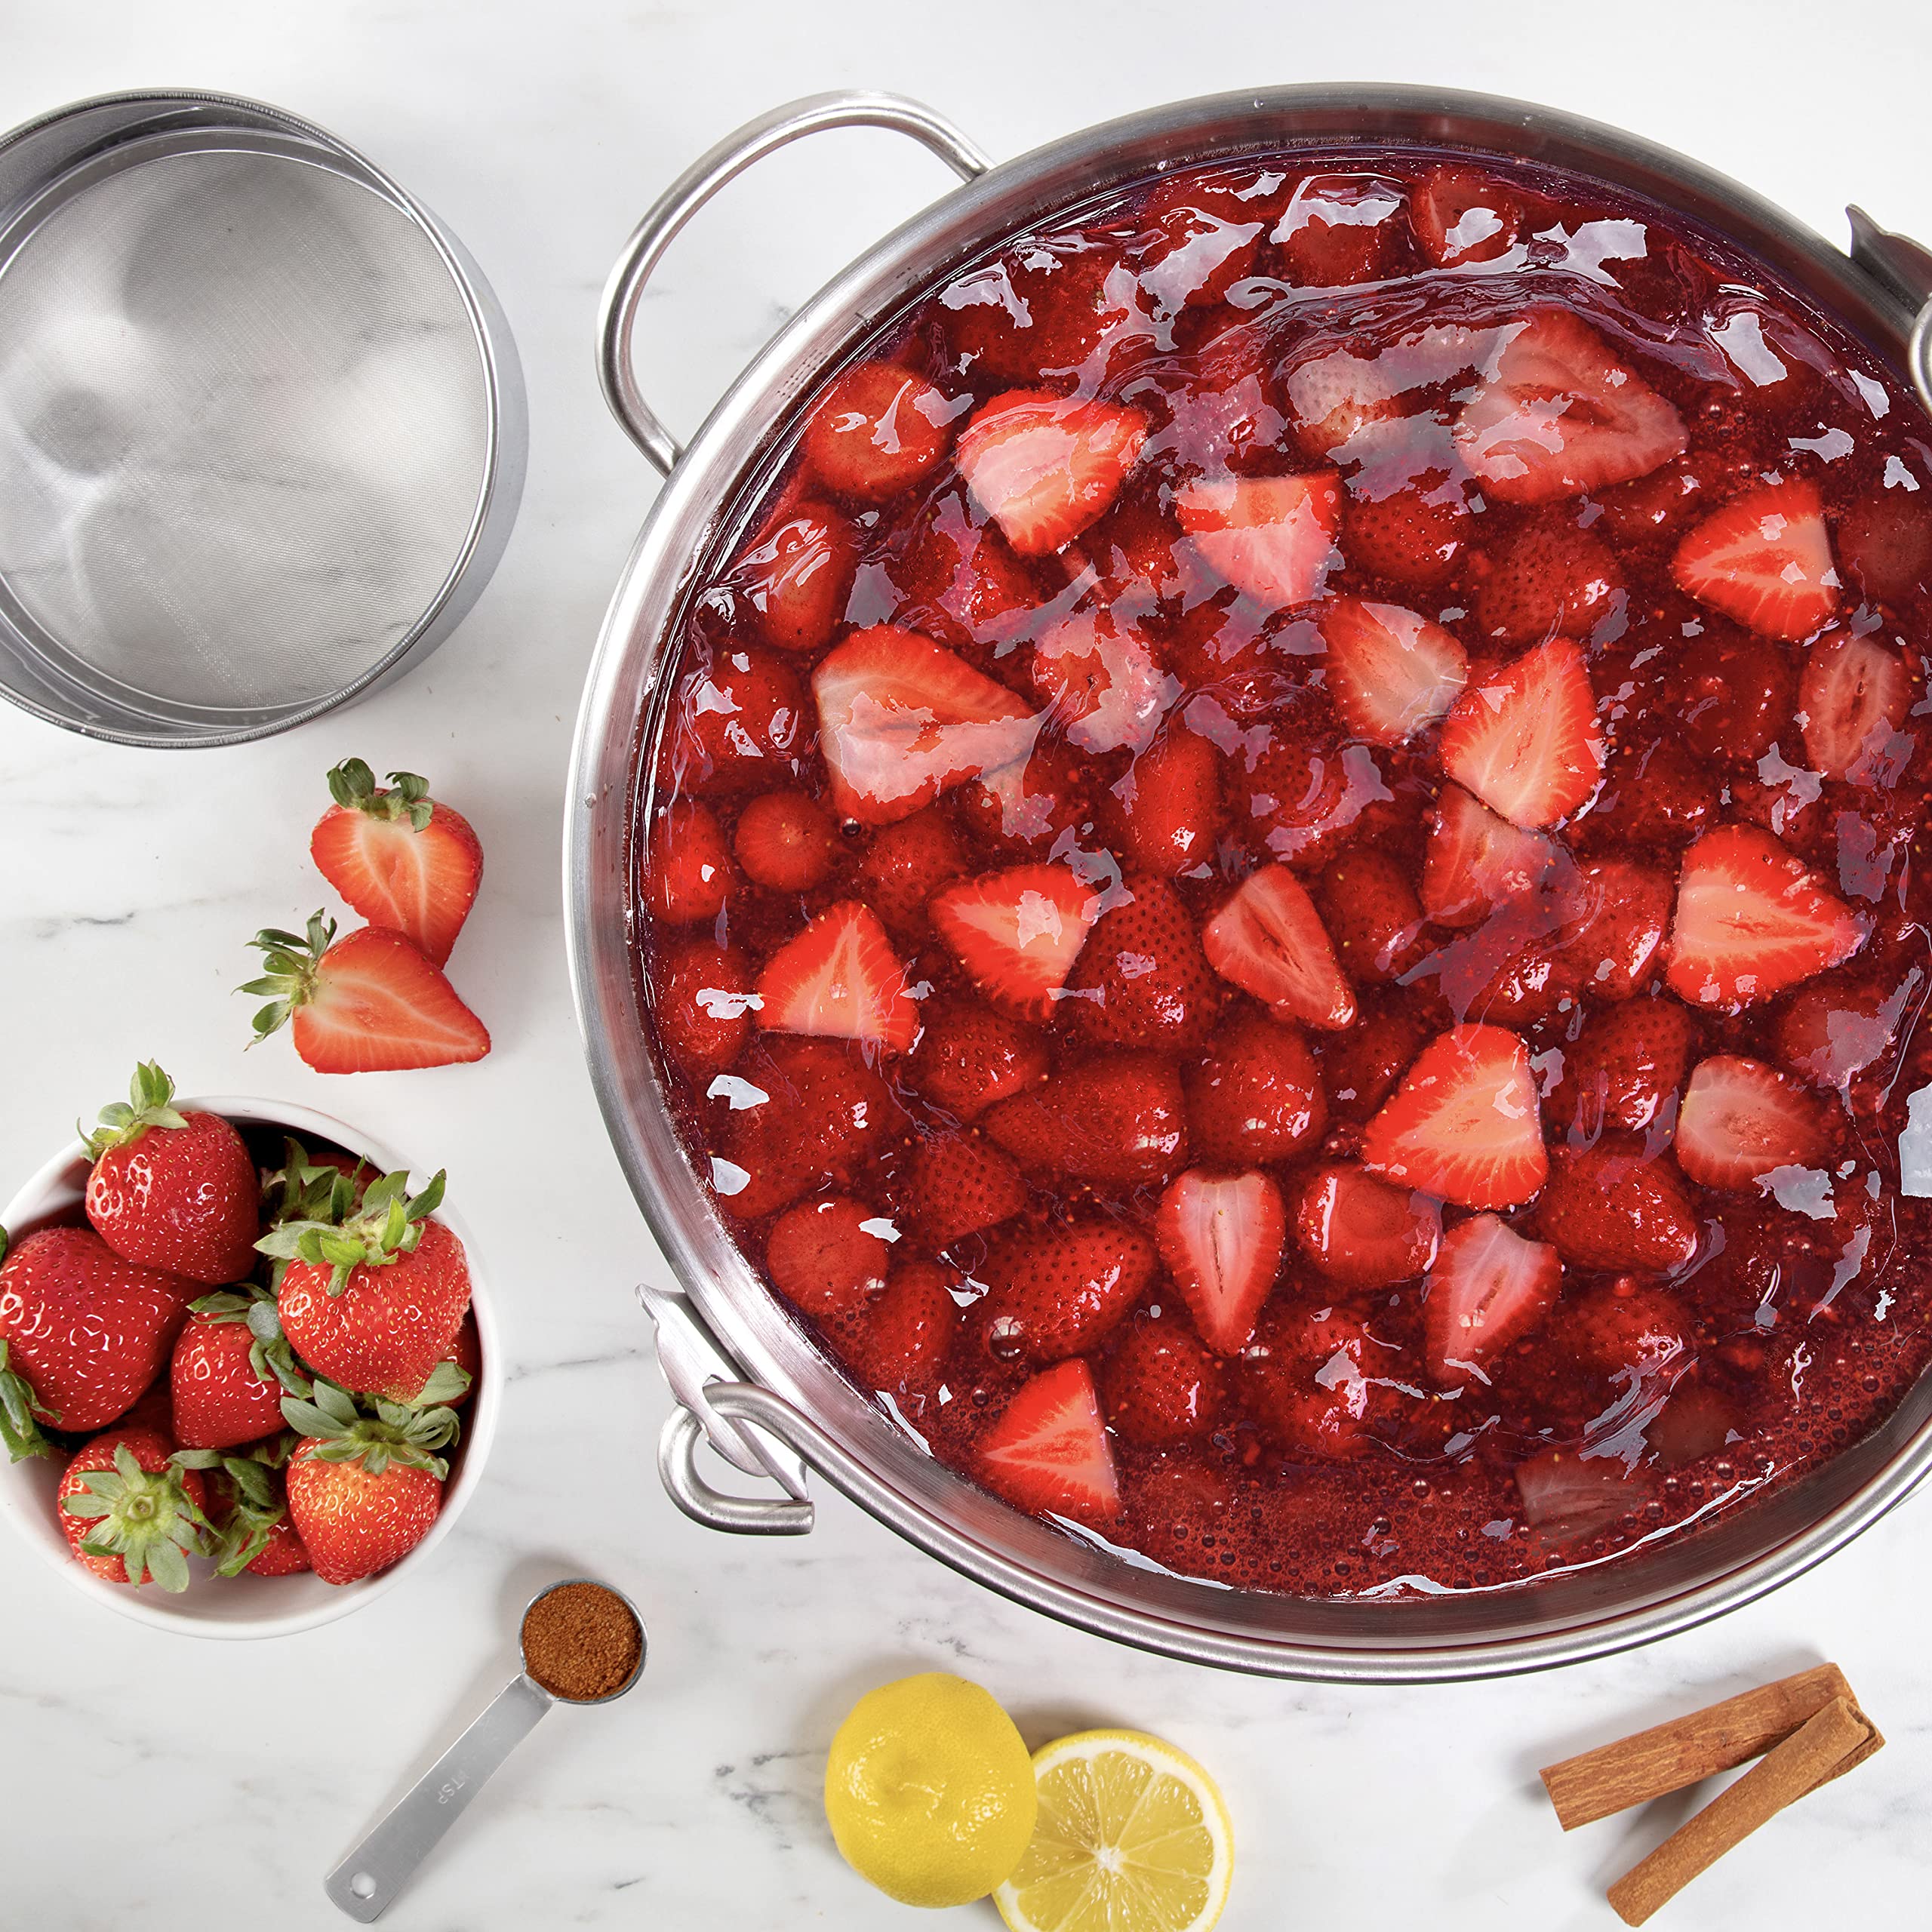 2 Gallon Stainless Steel Maslin Jam Pan, 8 Quarts- Pot includes Strainer Funnel Side Handle Pouring Spout- Graduated Concise Measuring Lines- Make Berry Jellies Jams Marmalades Sauce for Holiday Pies